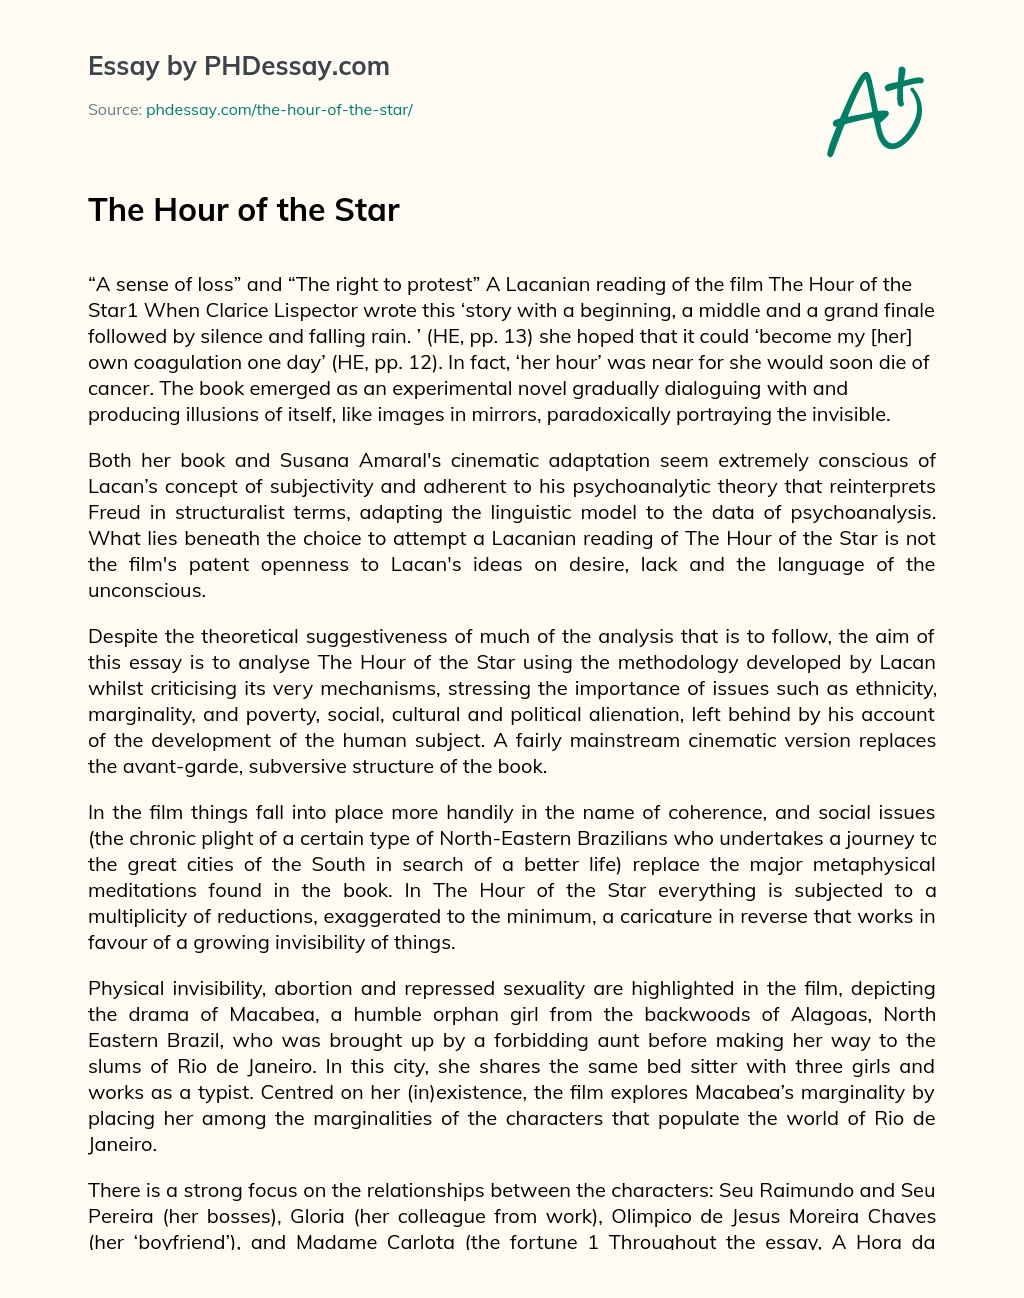 The Hour of the Star essay